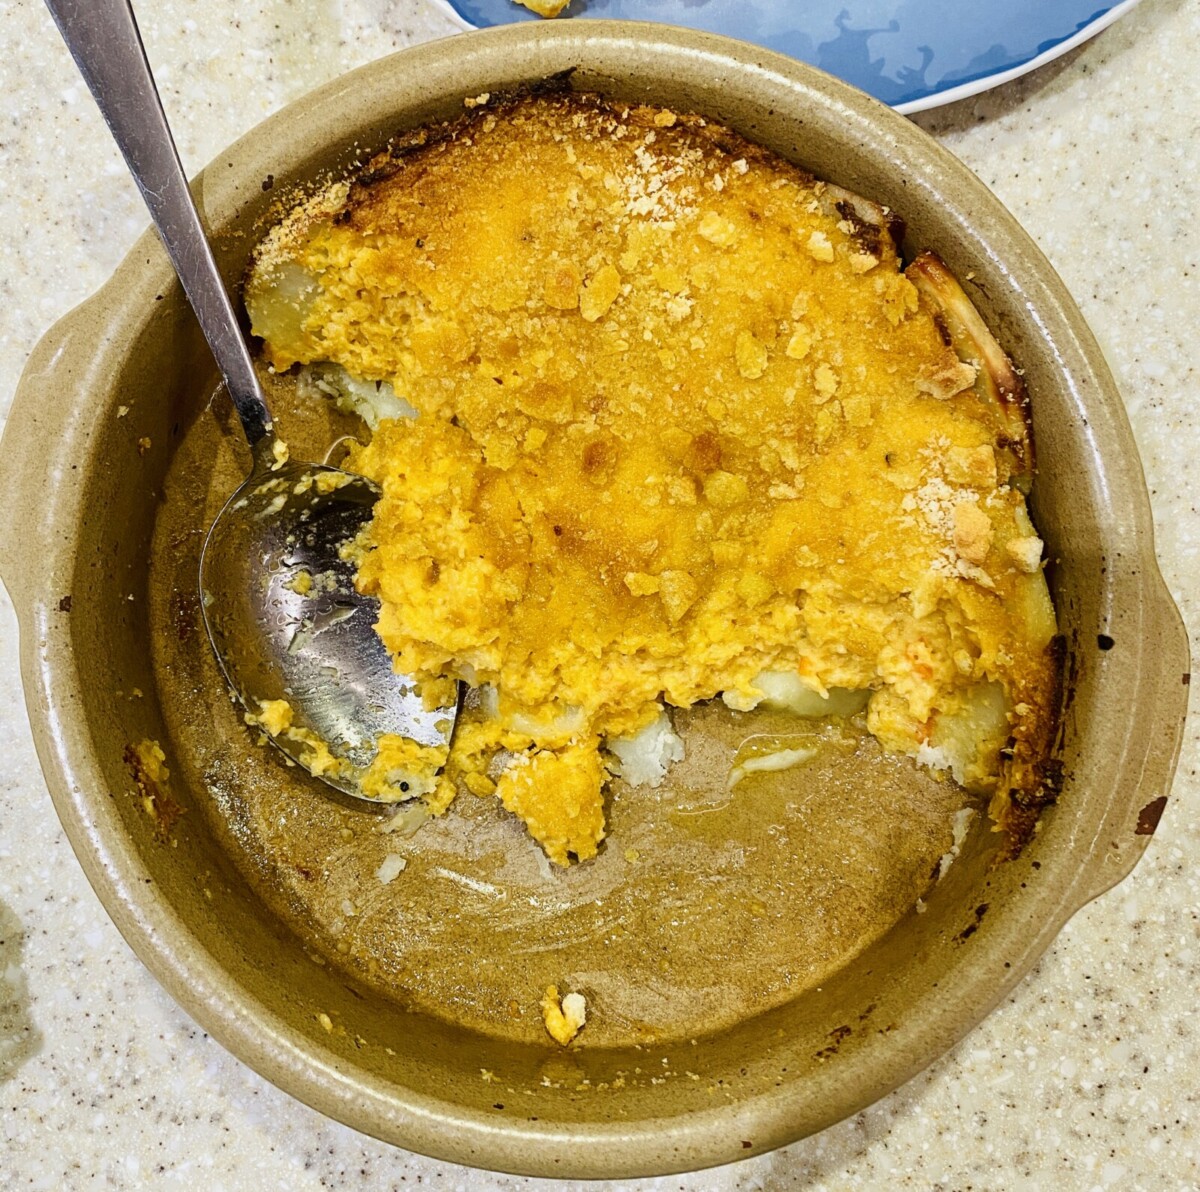 swede gratin in a beige pottery dish with a serving spoon